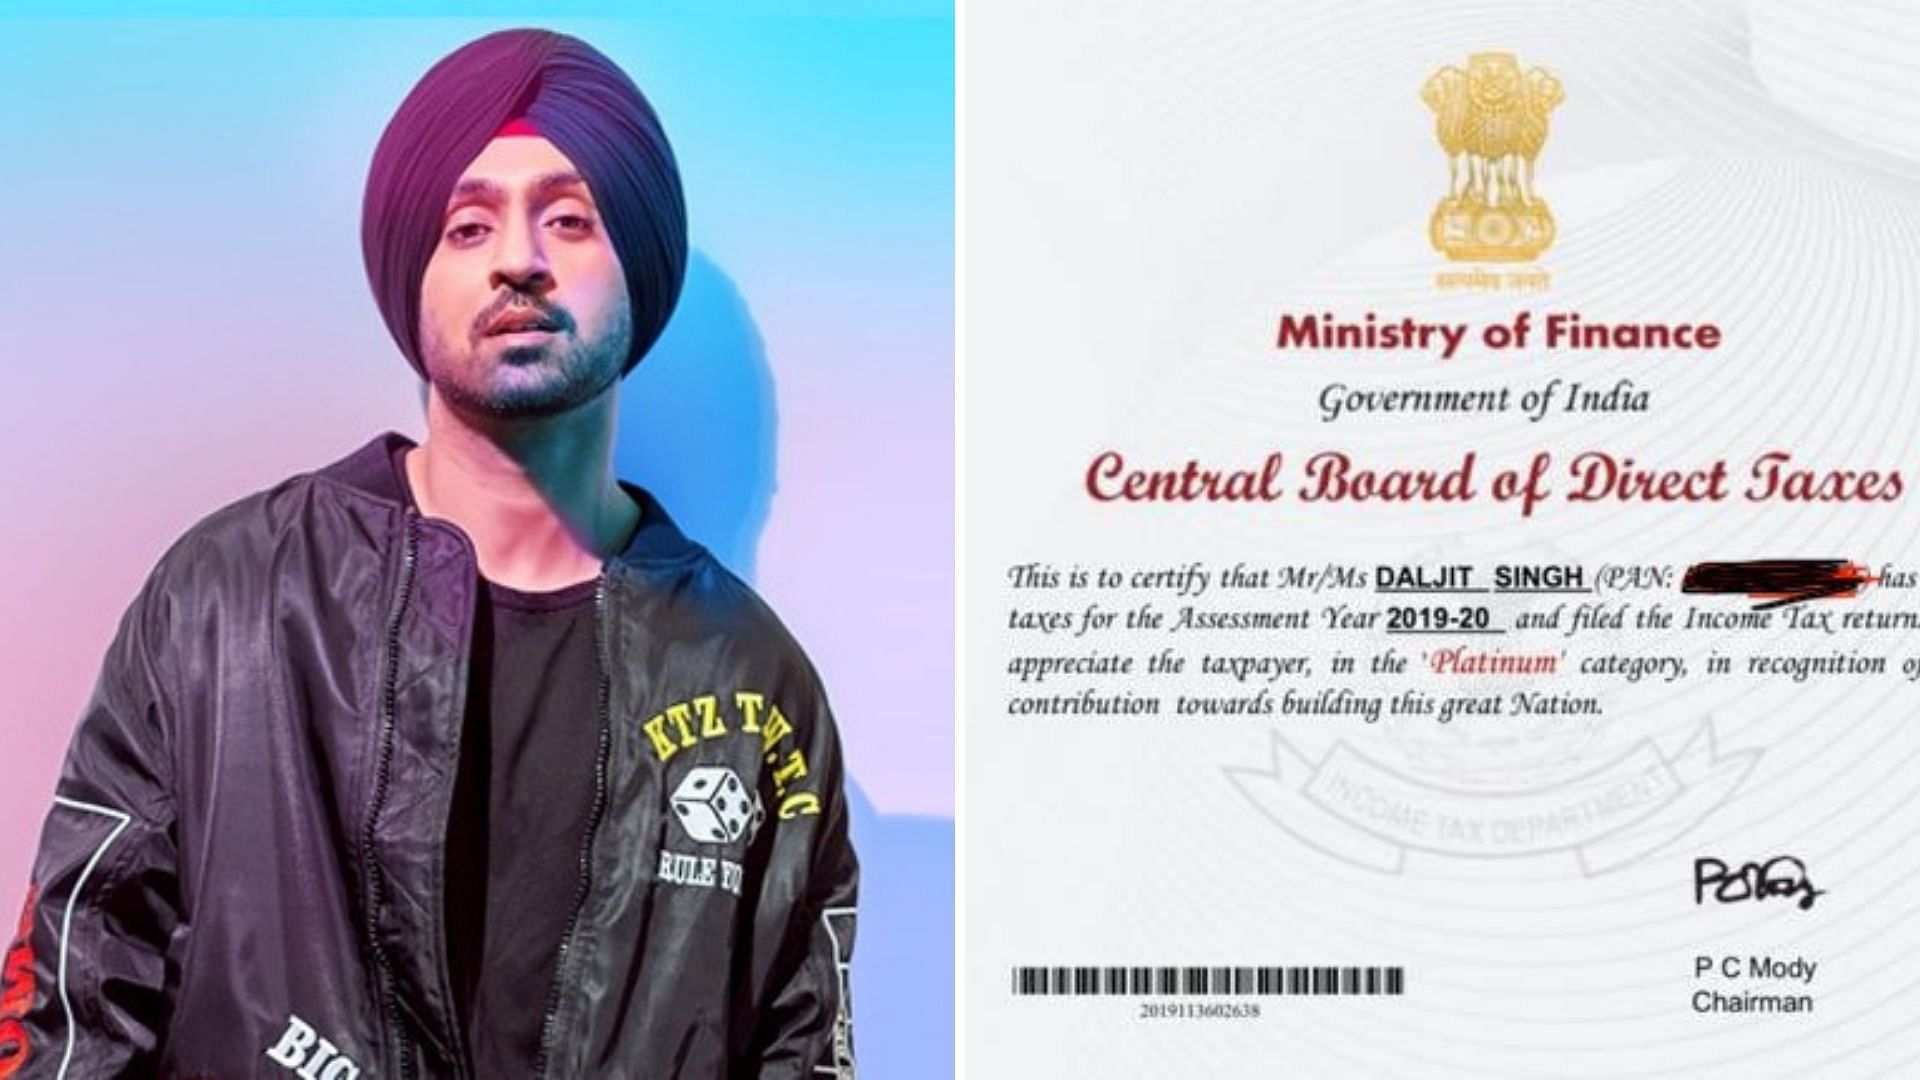 Diljit Dosanjh shares certificate from IT department amid reports of probe.